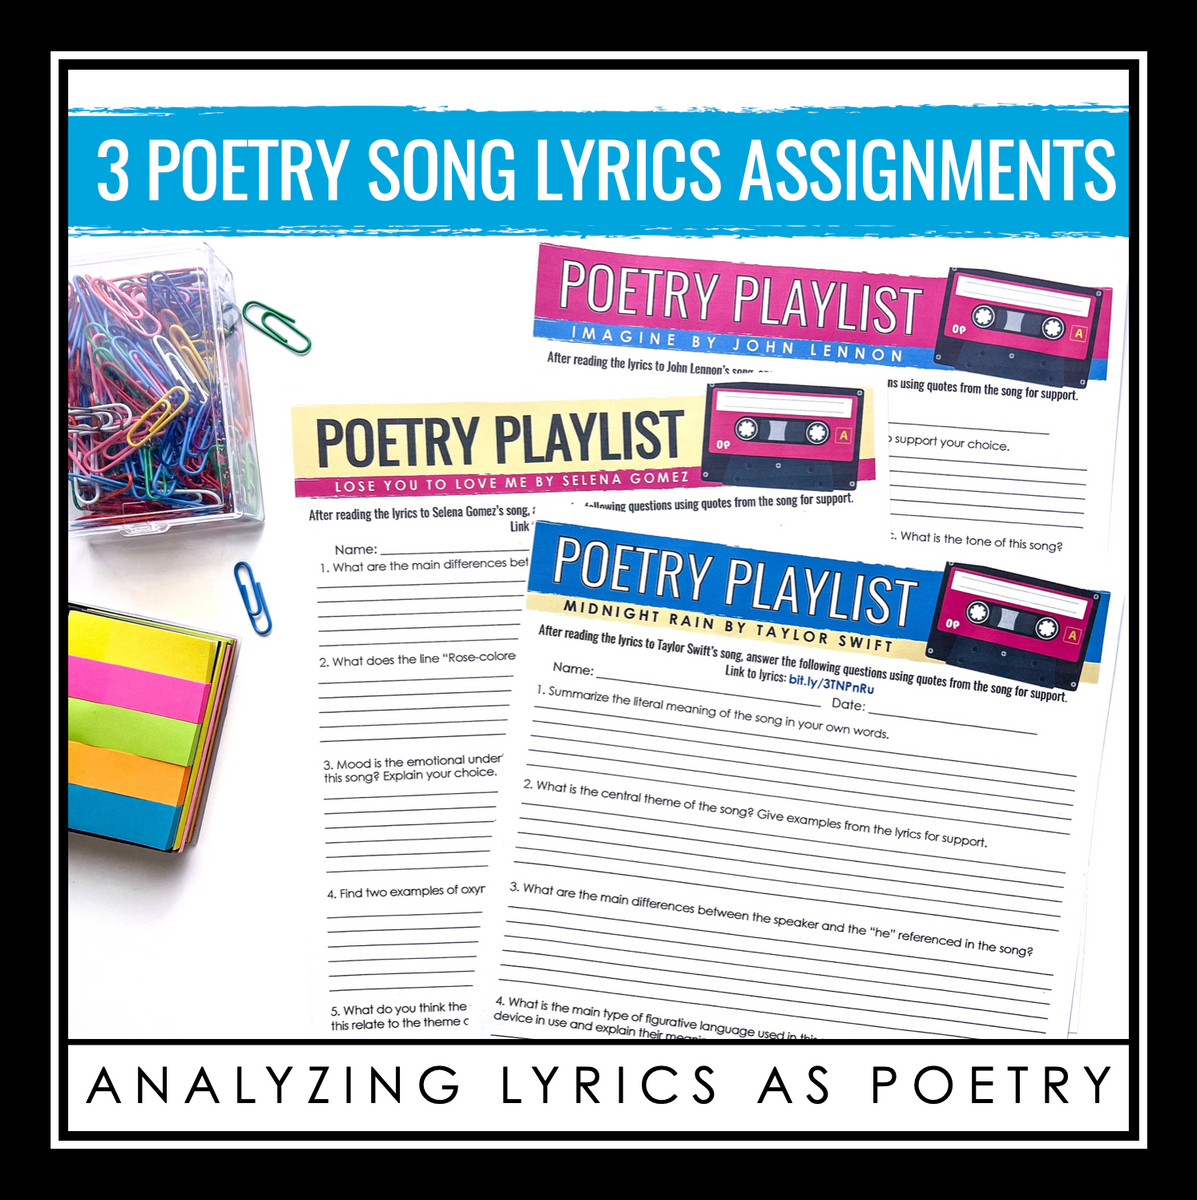 song lyrics as poetry assignment